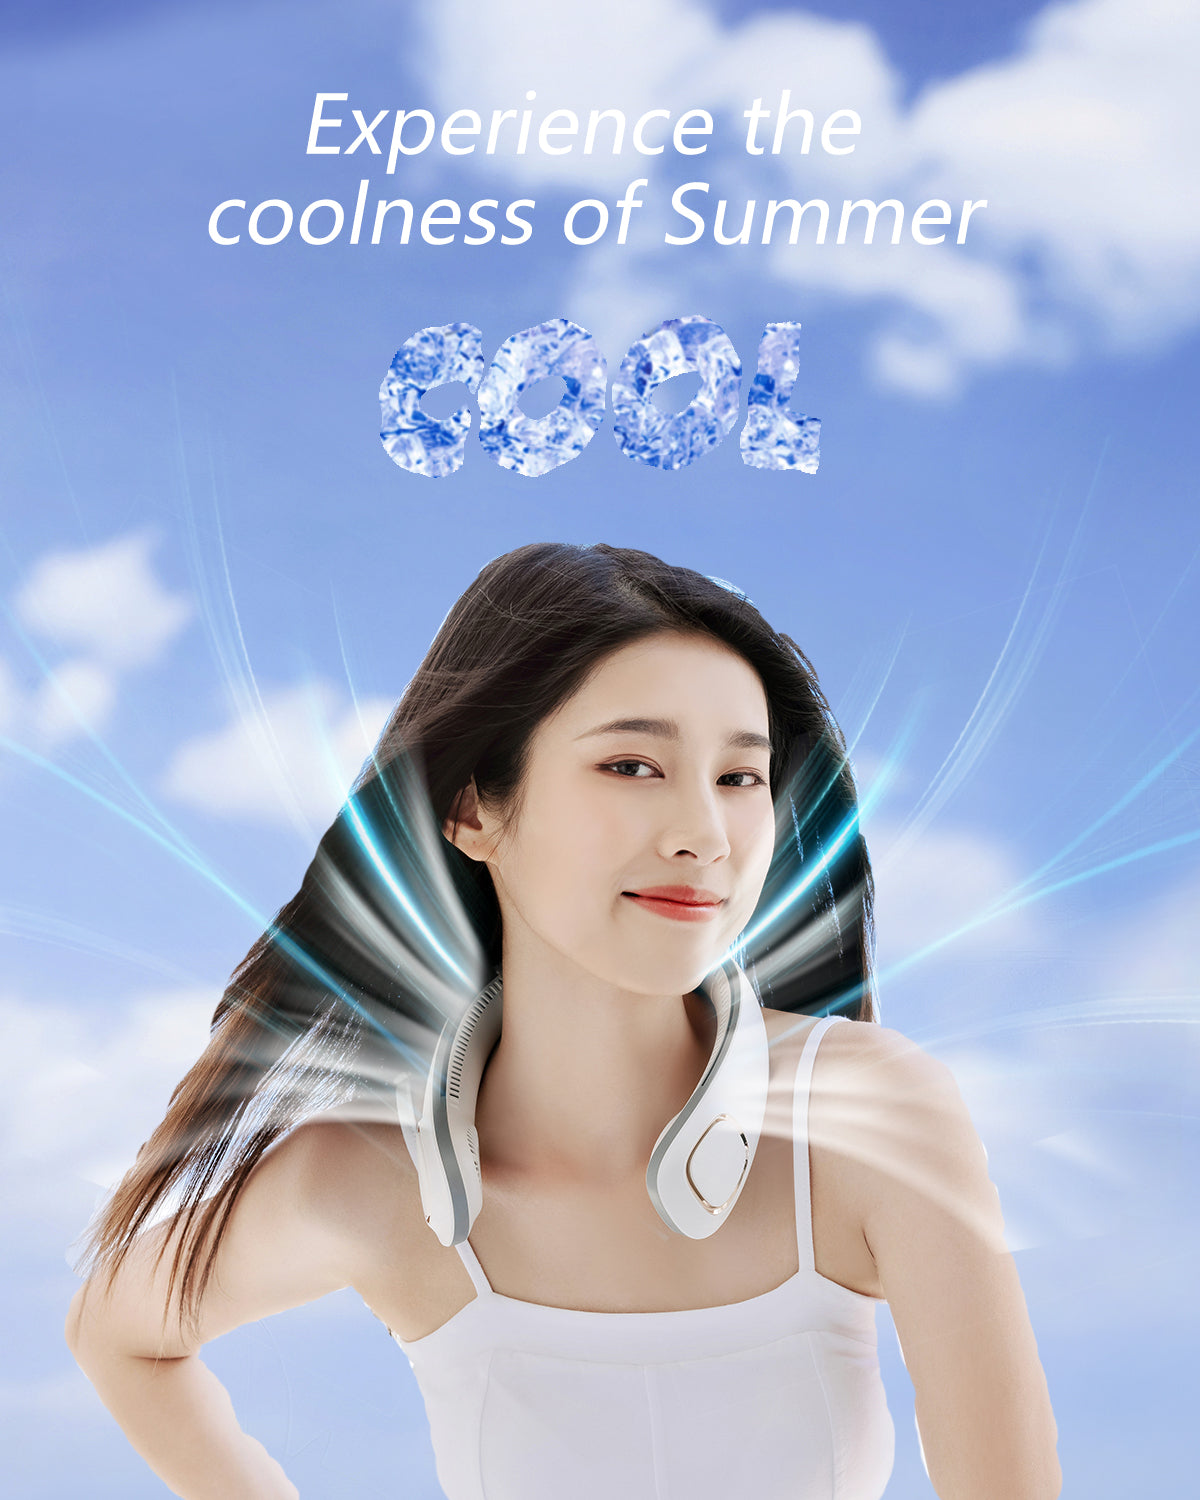 Stay Cool Anywhere with SmaFun Portable Rechargeable Air Conditioner Neck Fan-3 Seconds Superconduct Fast Cooling, Bladeless and Quiet, Adjustable 3 Speeds, Fashionable Design for Outdoor/Home/Office Use